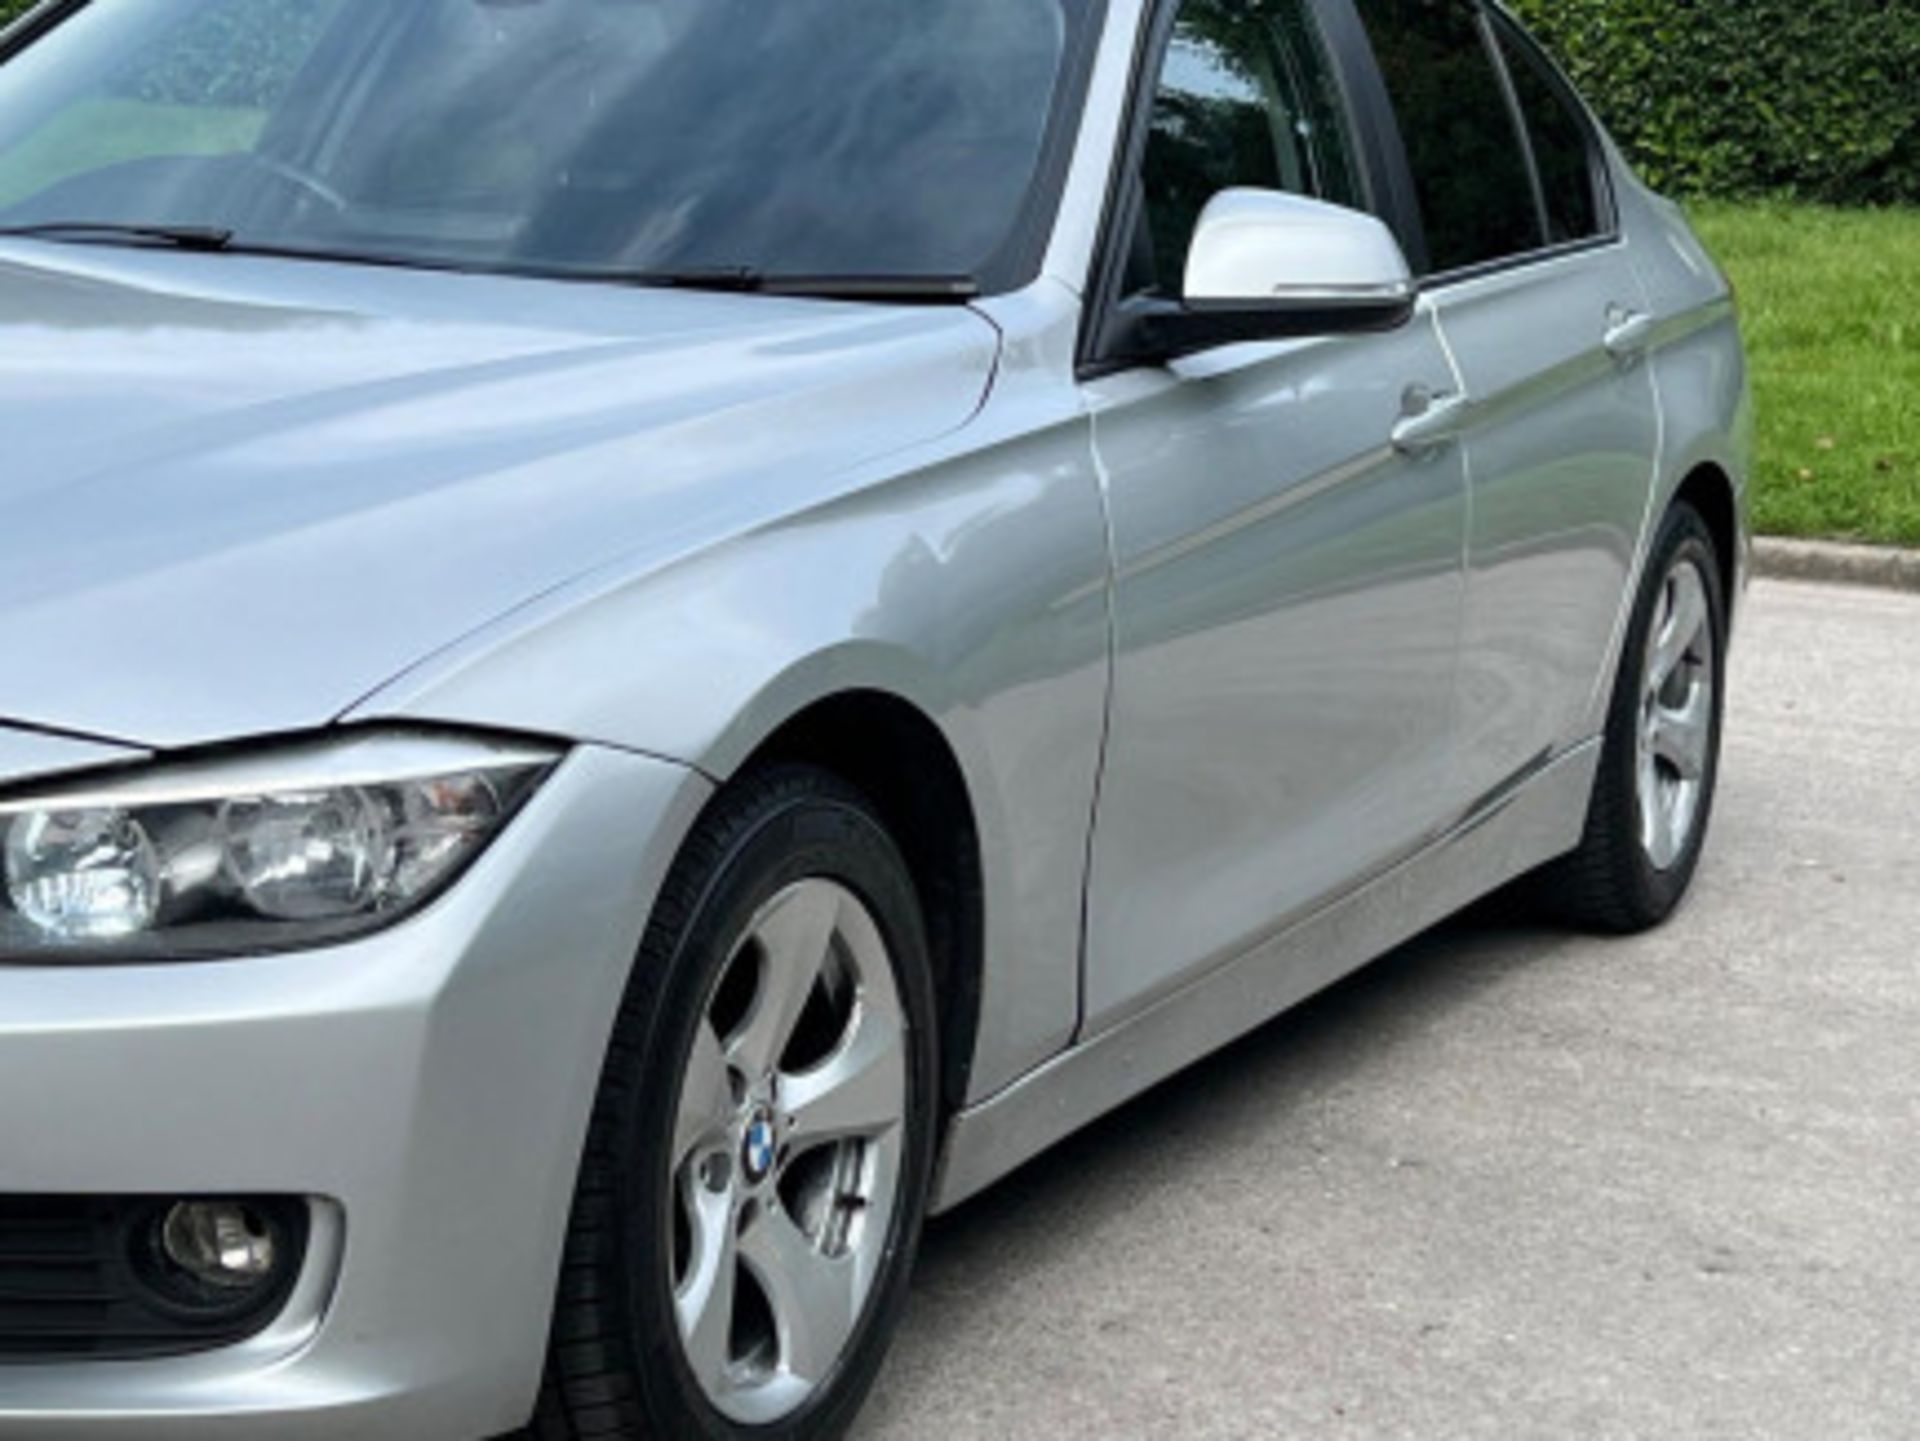 BMW 3 SERIES 2.0 DIESEL ED START STOP - A WELL-MAINTAINED GEM >>--NO VAT ON HAMMER--<< - Image 103 of 229